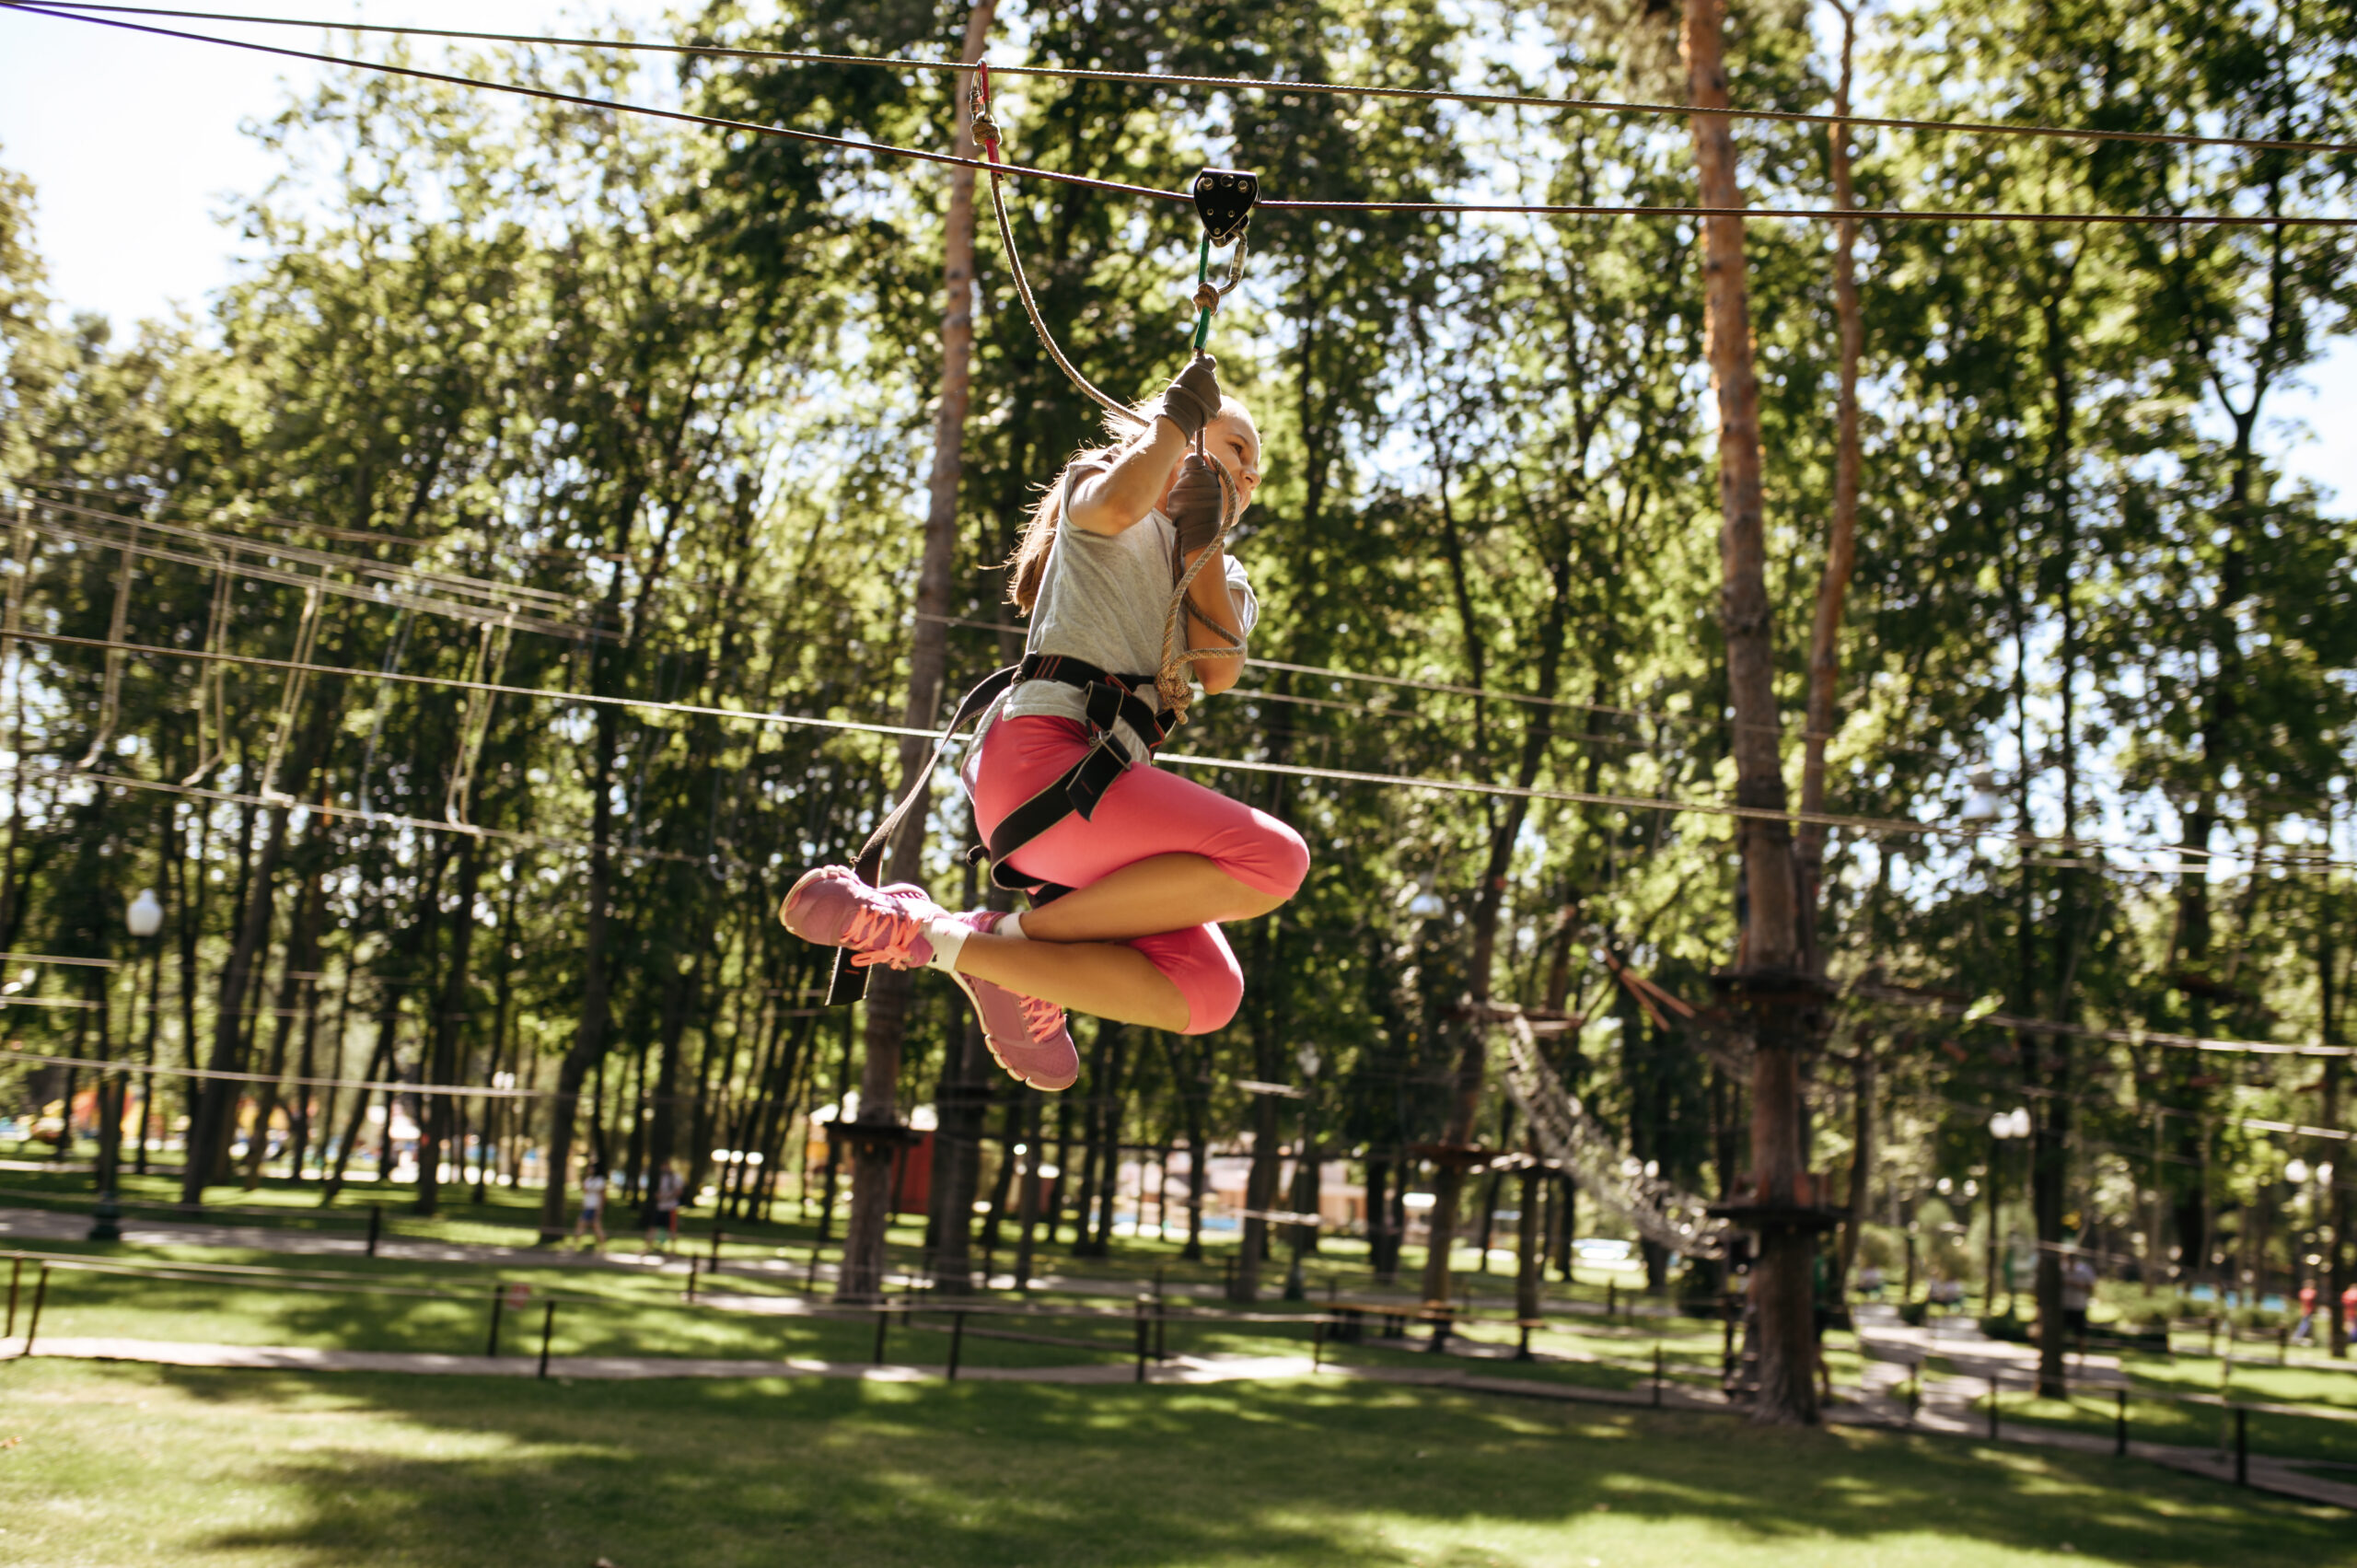 Little brave girl on zipline in rope park, playground. Child climbing on suspension bridge, extreme sport adventure on vacations, danger entertainment outdoors